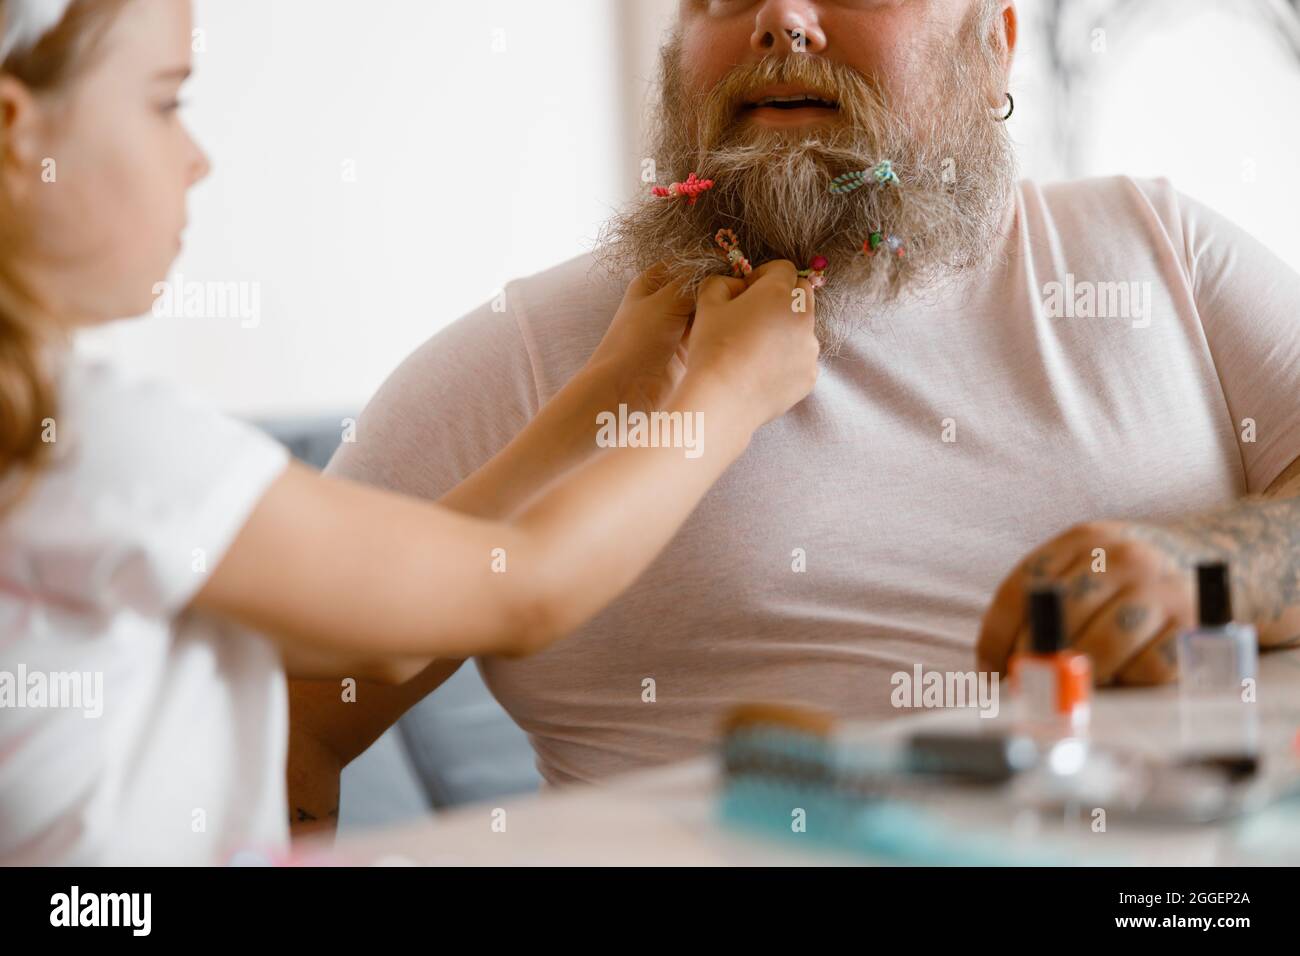 Girl puts colorful scrunchie onto long father beard playing together at home Stock Photo